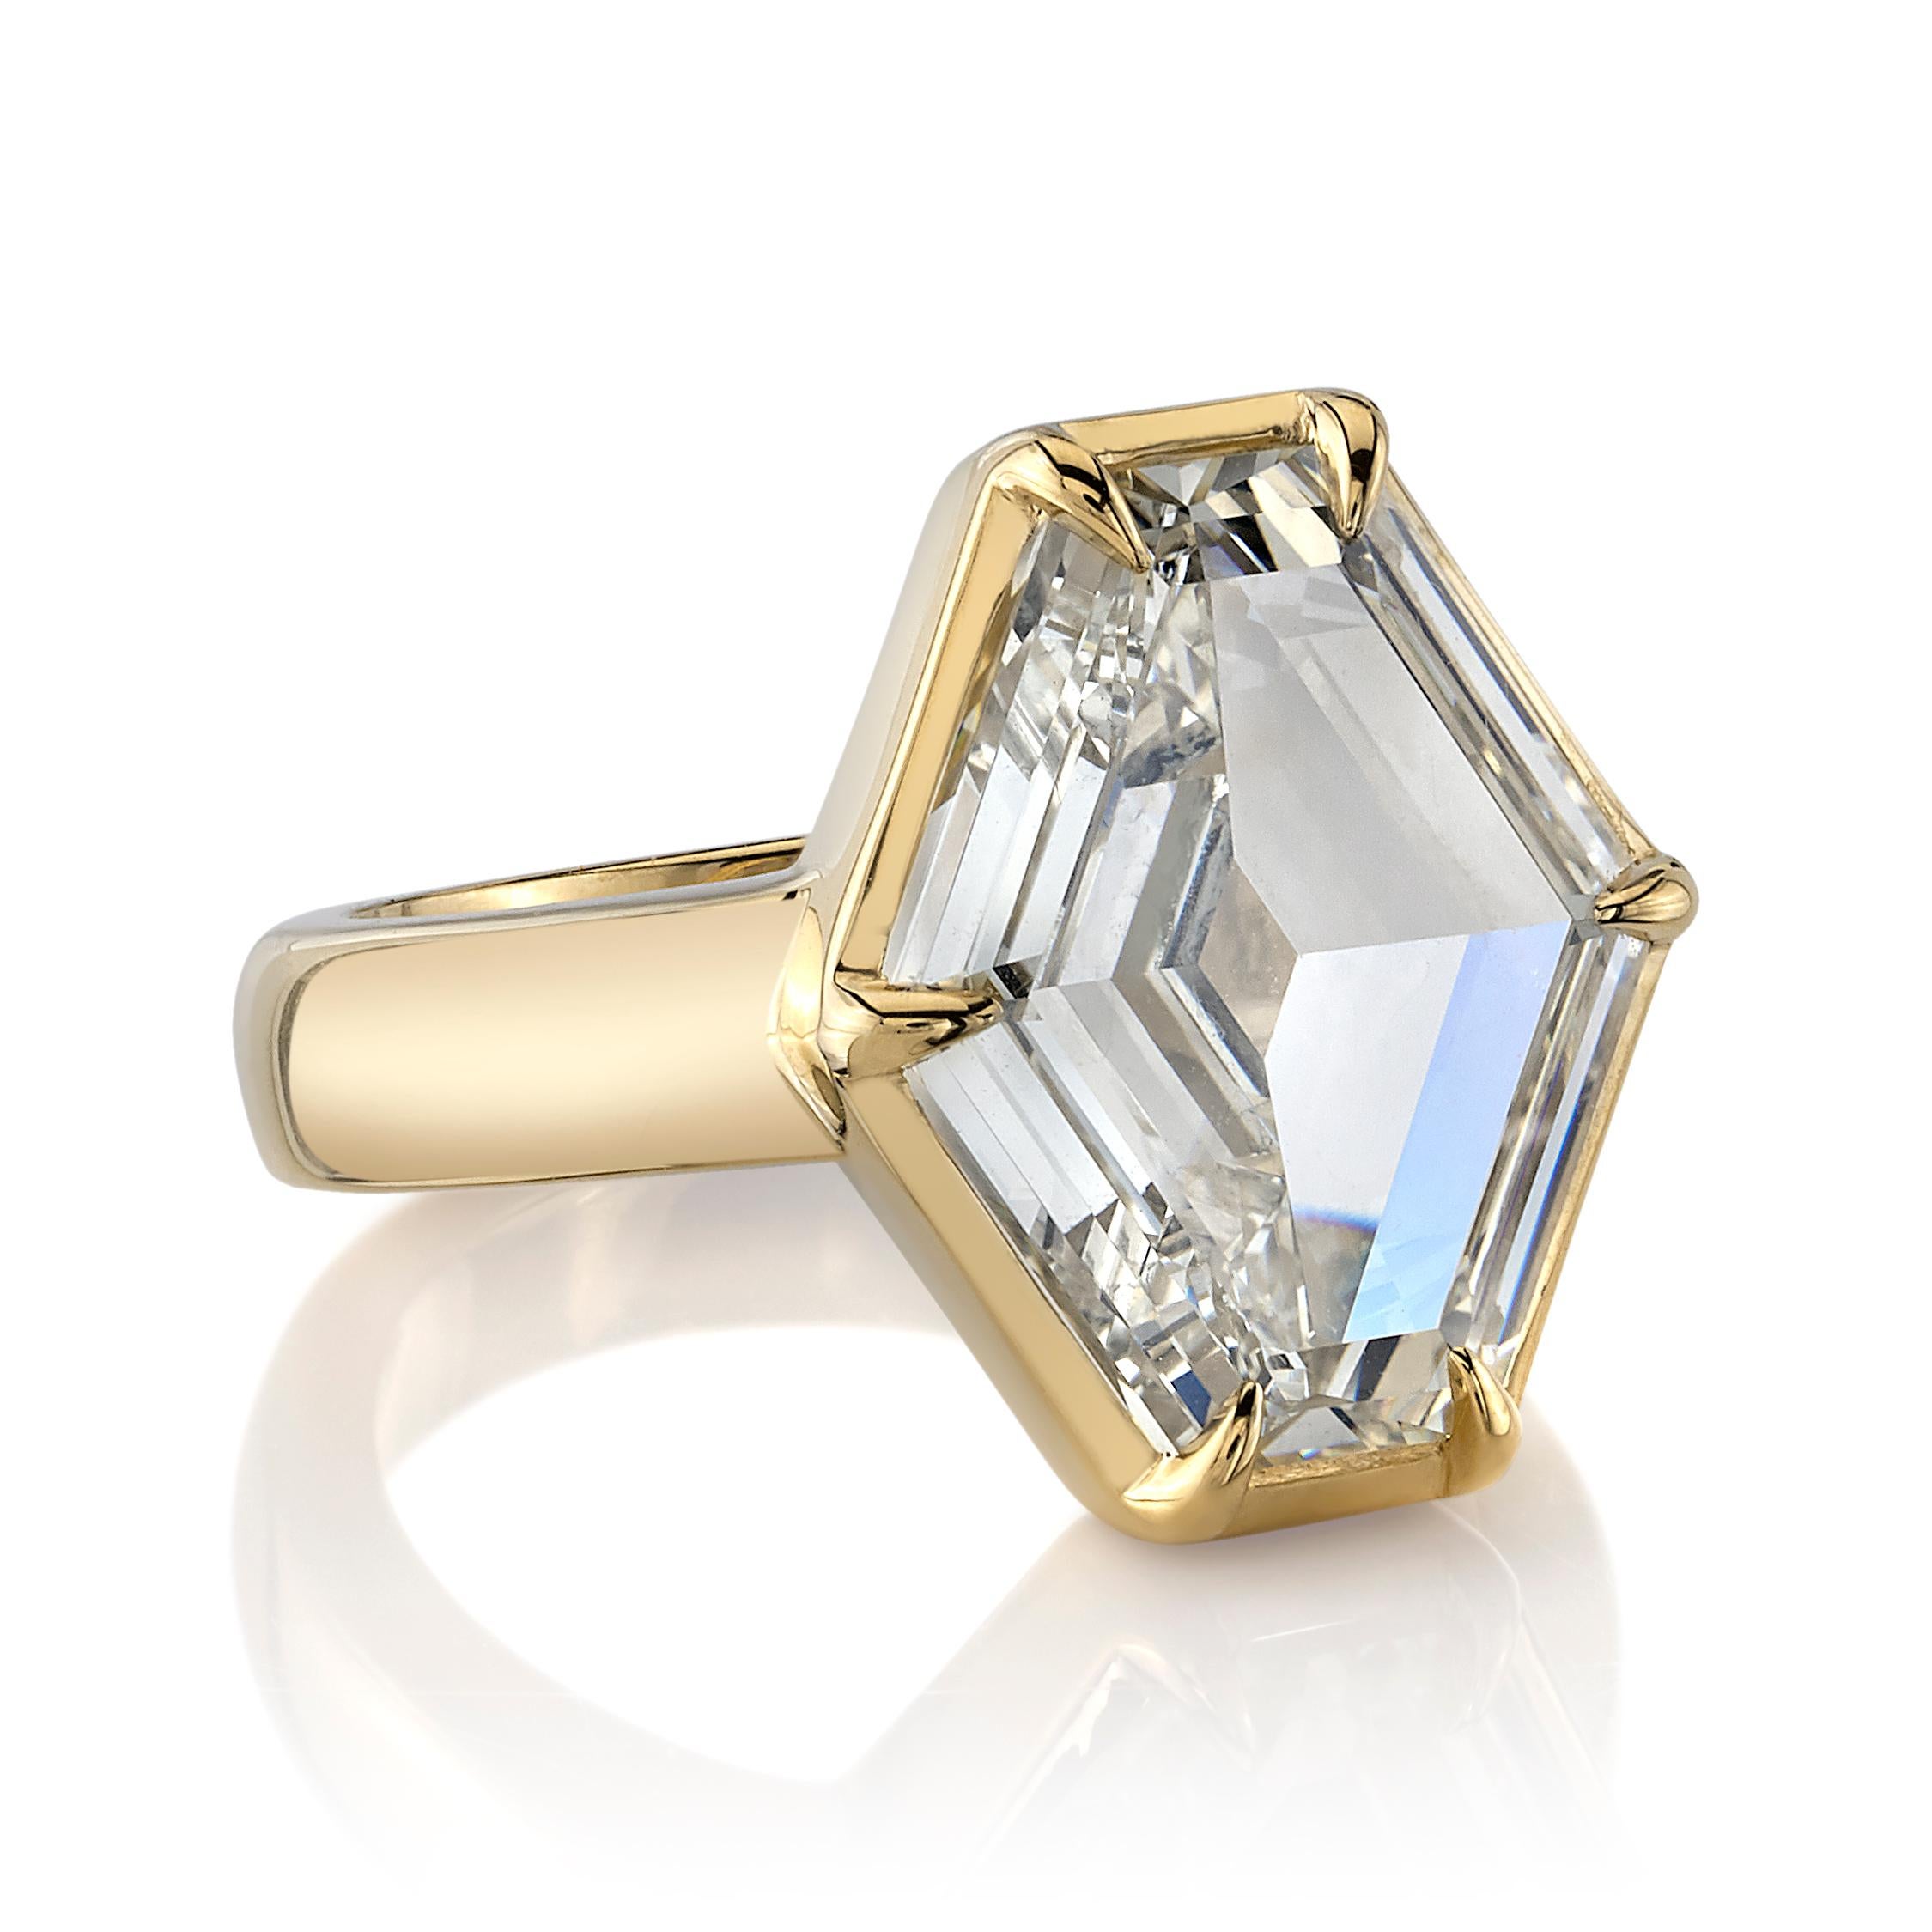 6.02ctw N/VS1 GIA certified Hexagonal Step cut diamond set in a handcrafted 18K yellow gold ring. 

Ring is currently size 6. Please contact us about potential re-sizing.

Our jewelry is made locally in Los Angeles and most pieces are made to order.